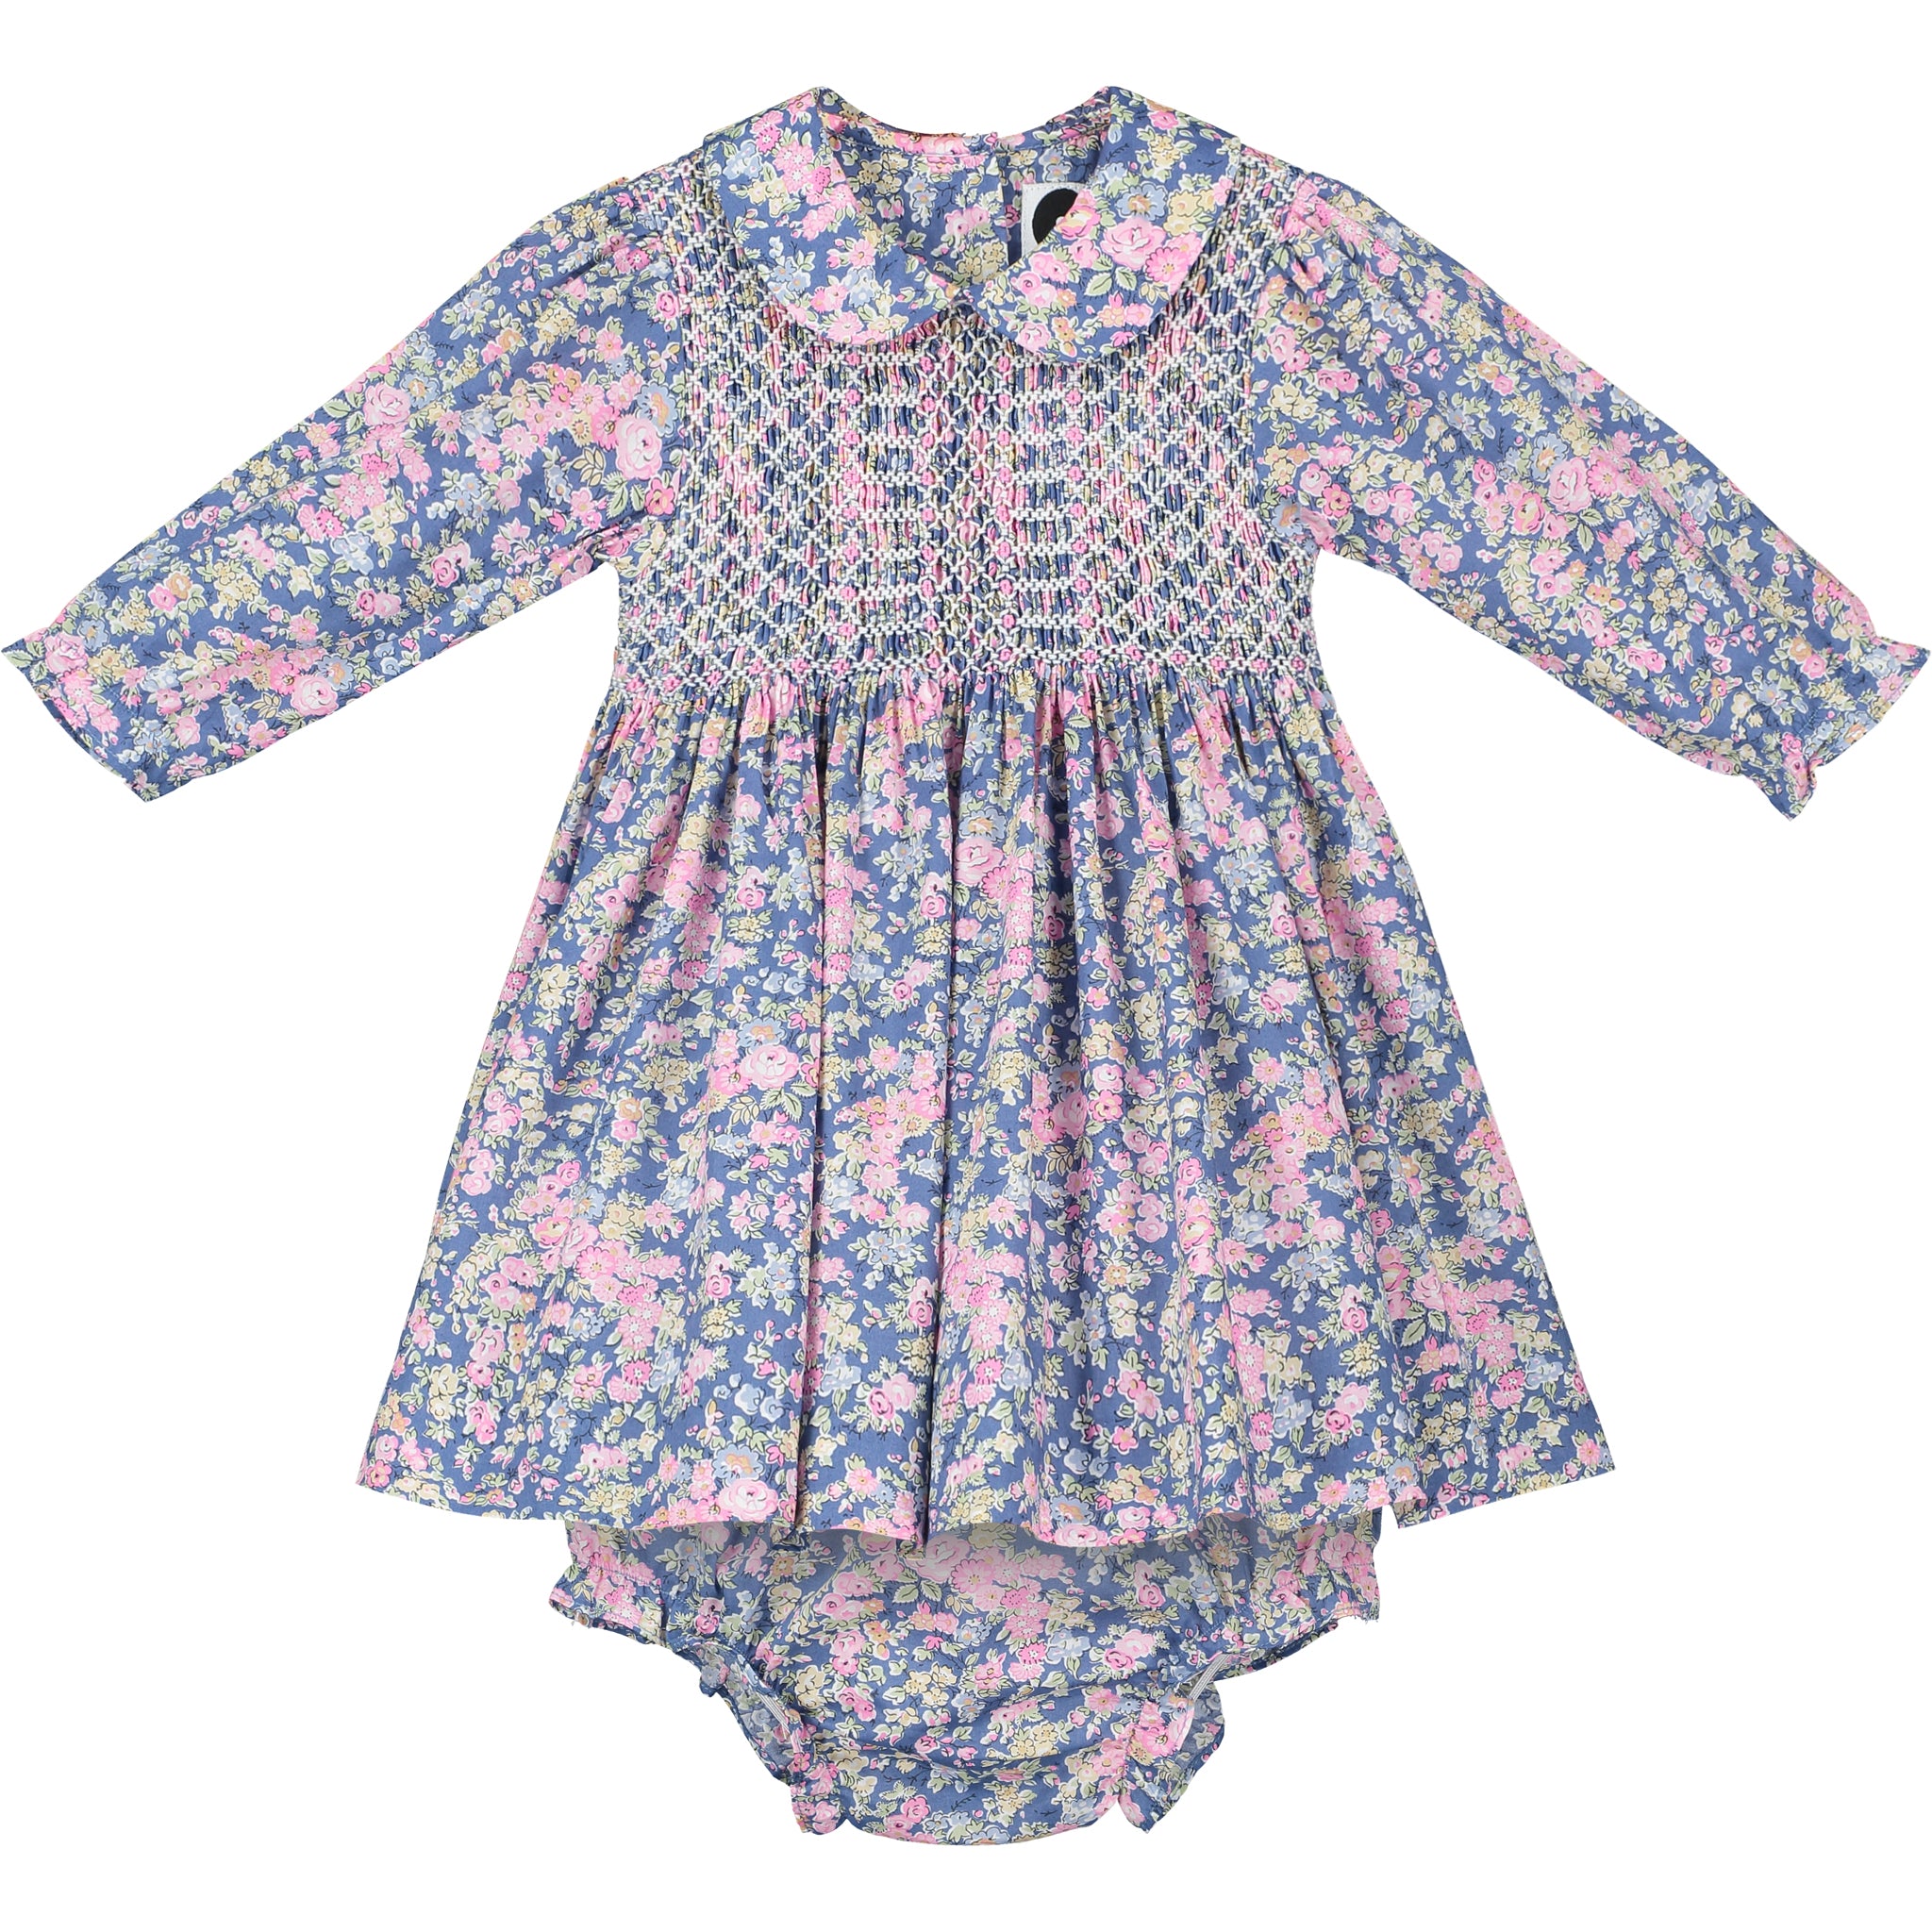 long-sleeve foral baby dress with smocking, front